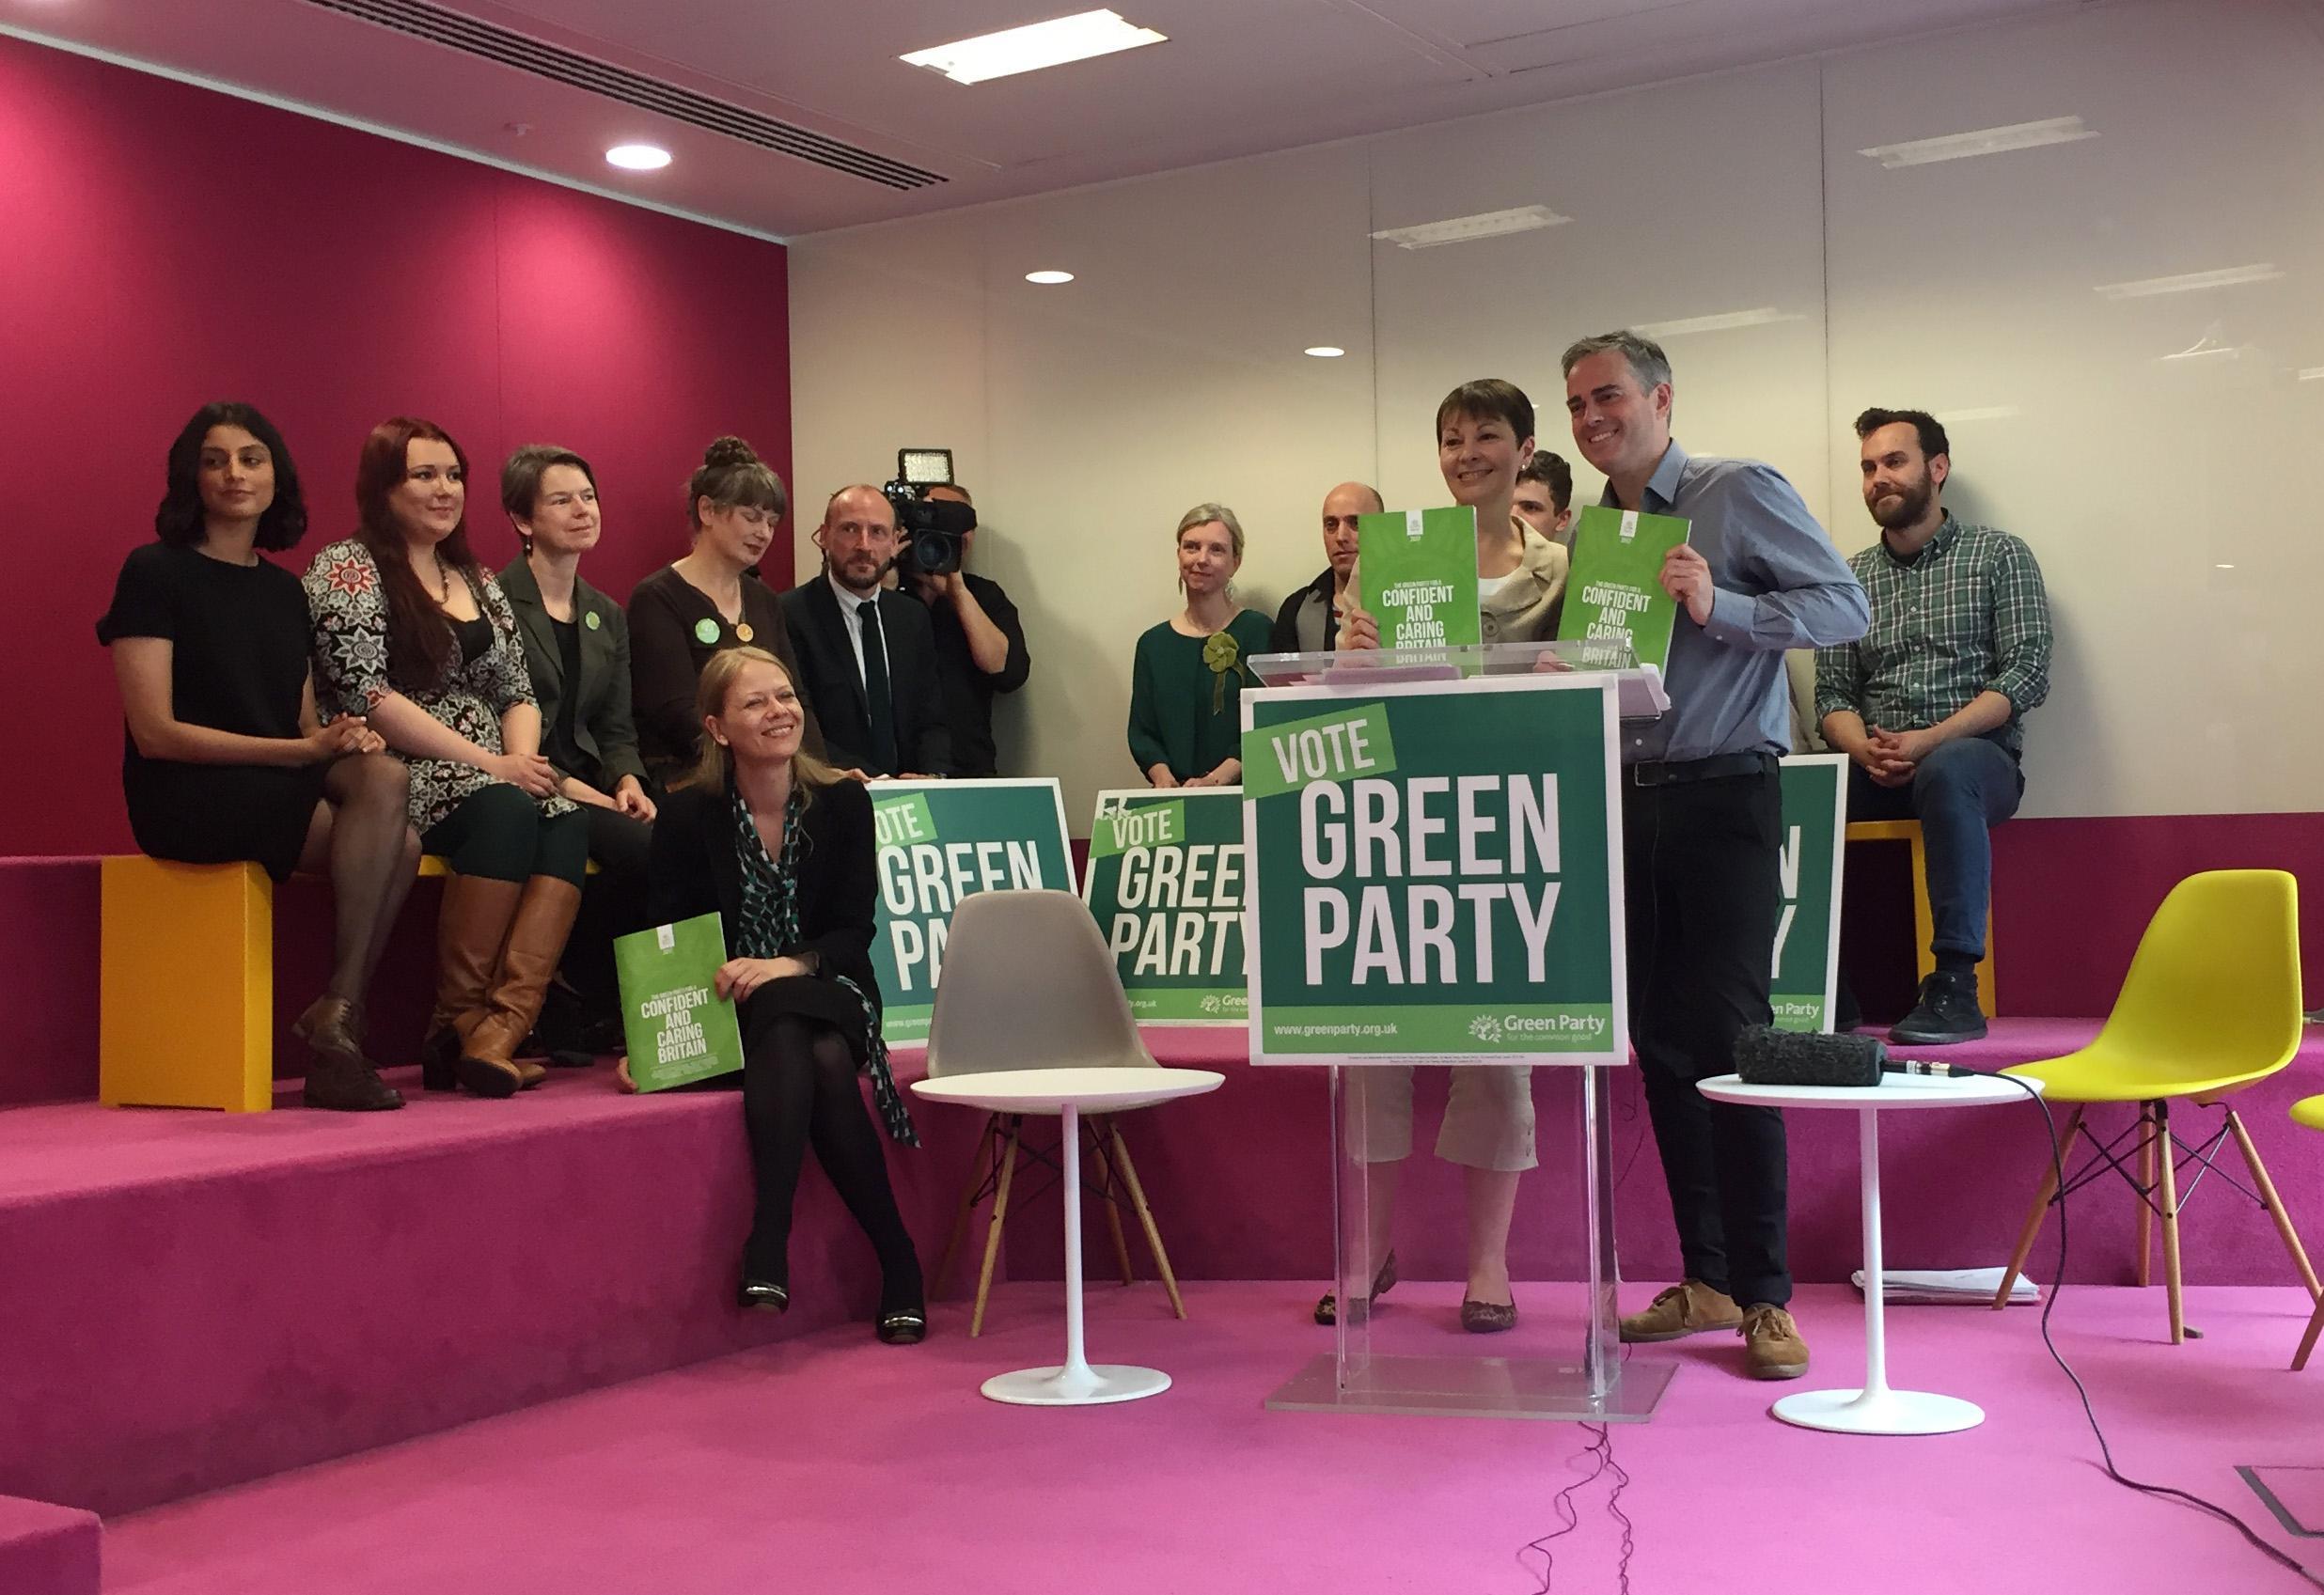 Green Party manifesto pledges four-day working week and universal basic income